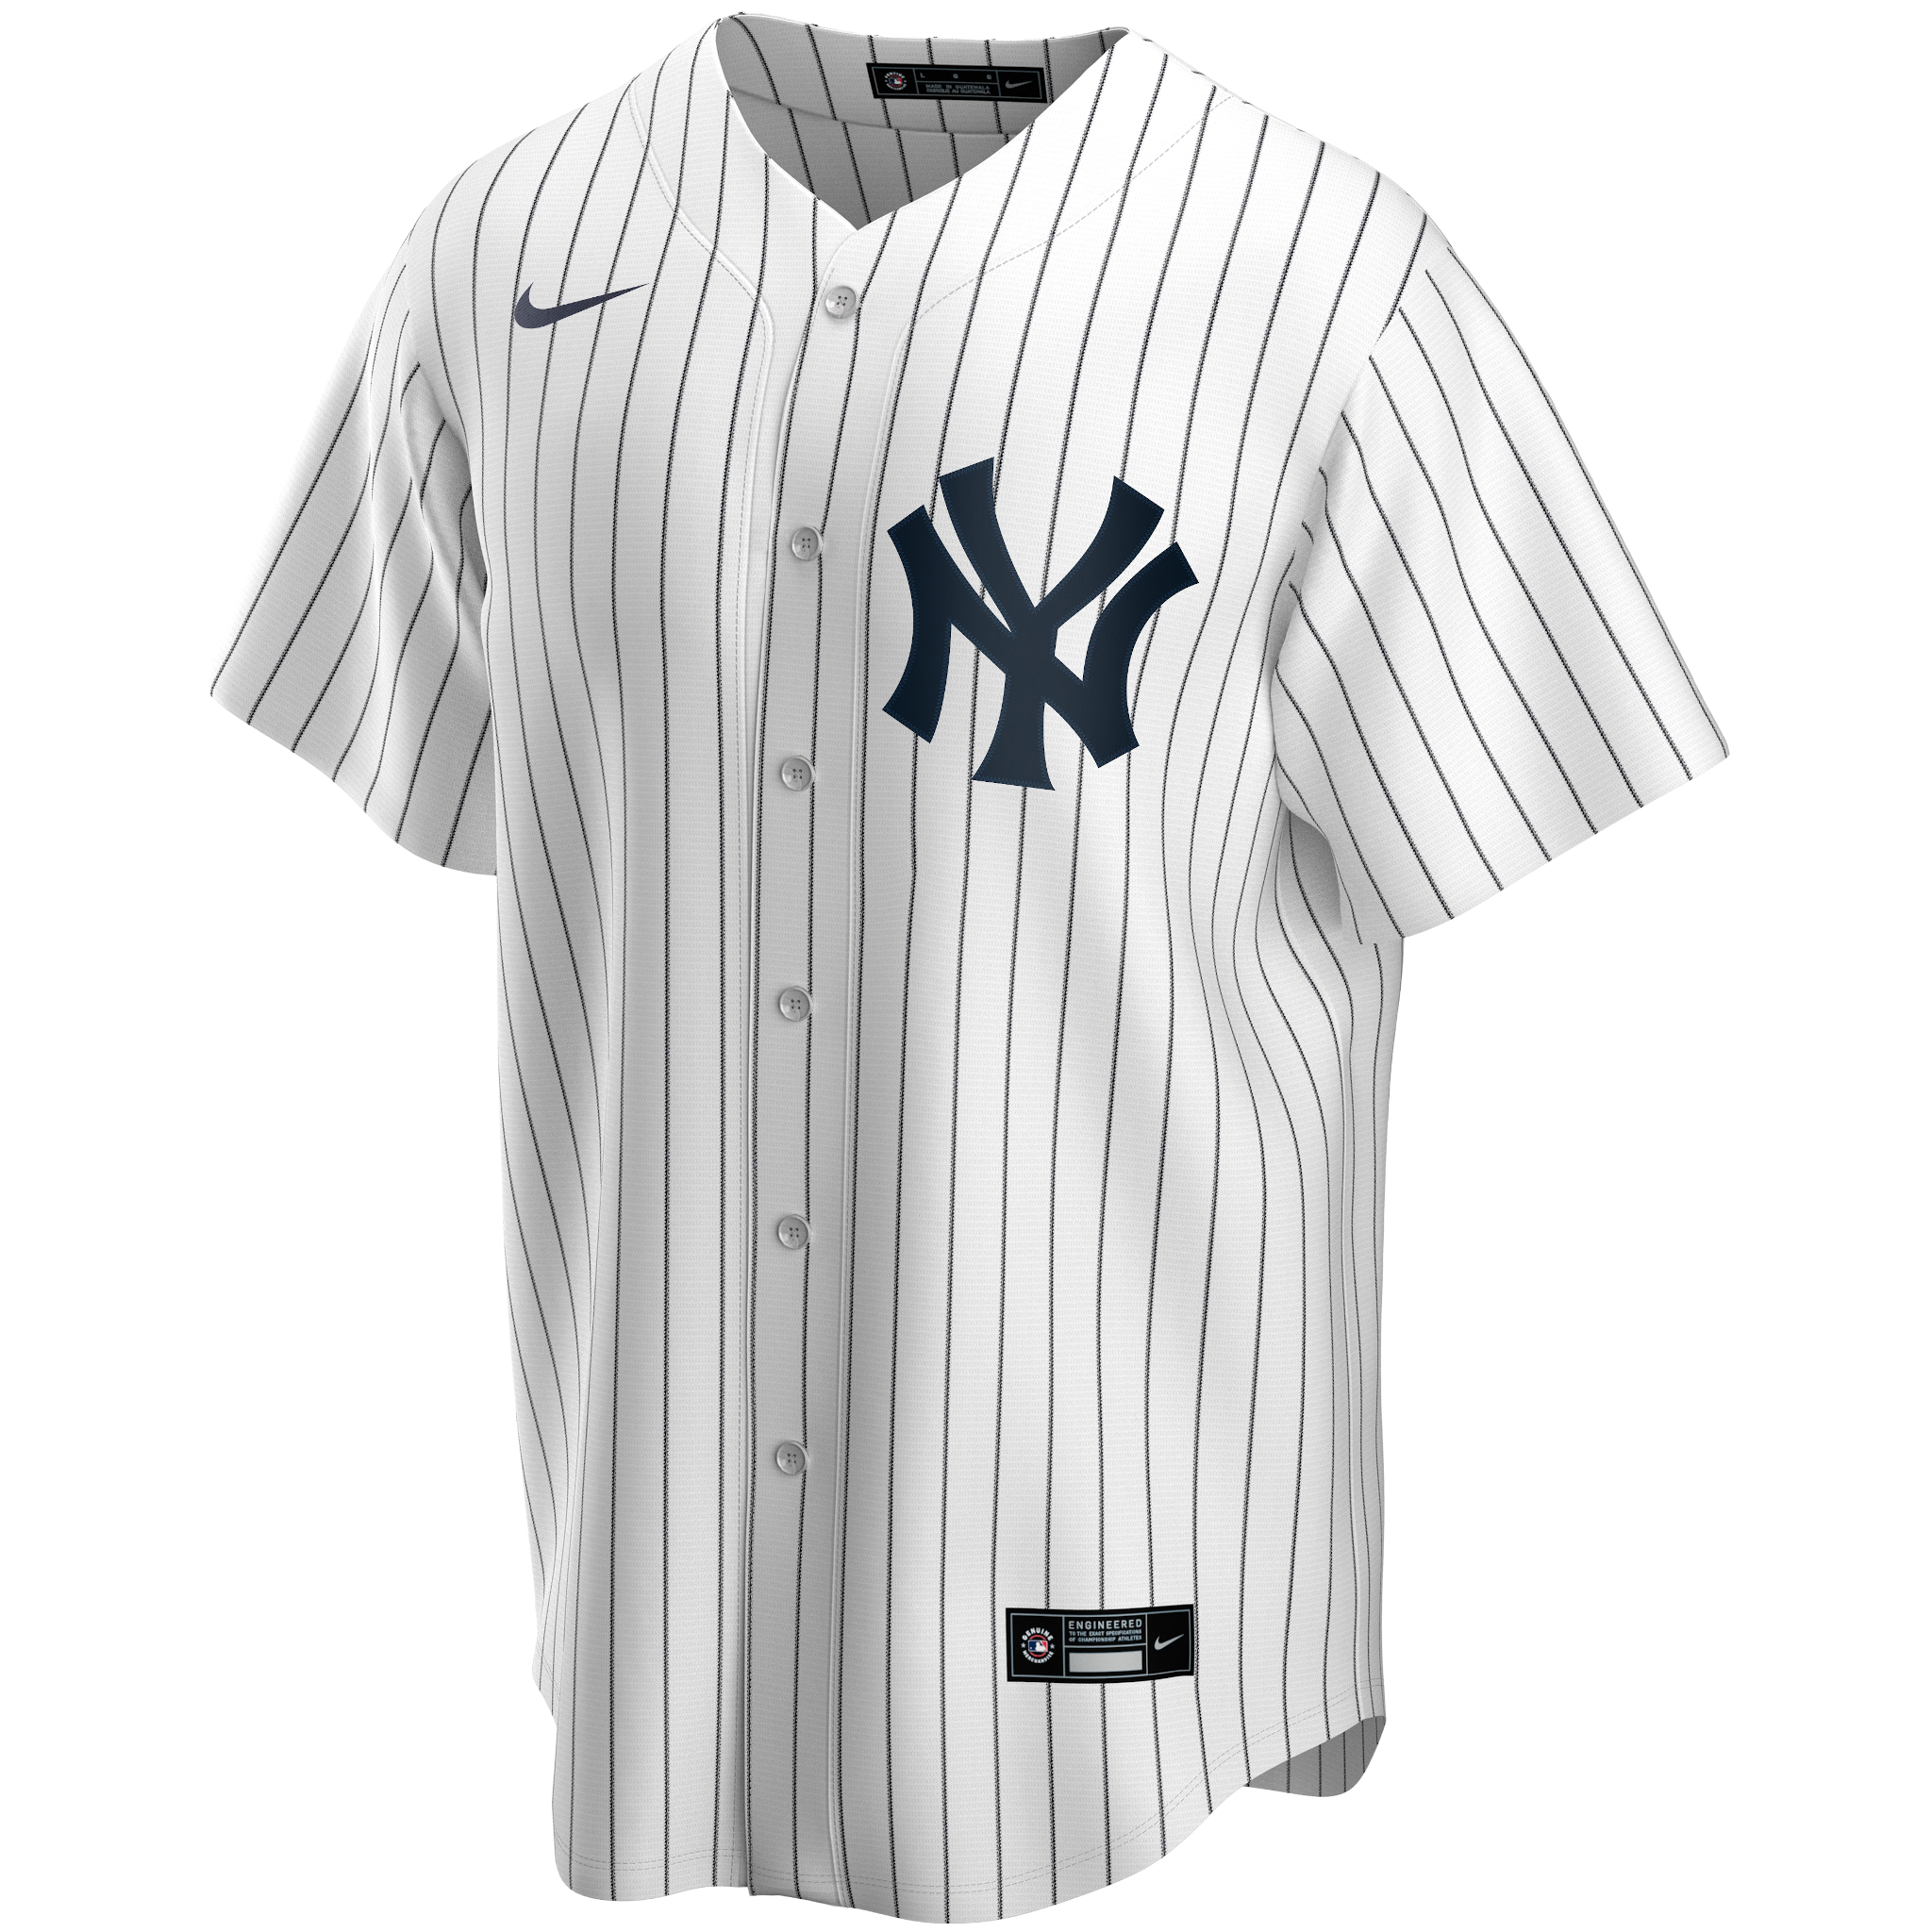 Mickey Mantle No Name Jersey - Yankees Replica Home Number Only Jersey